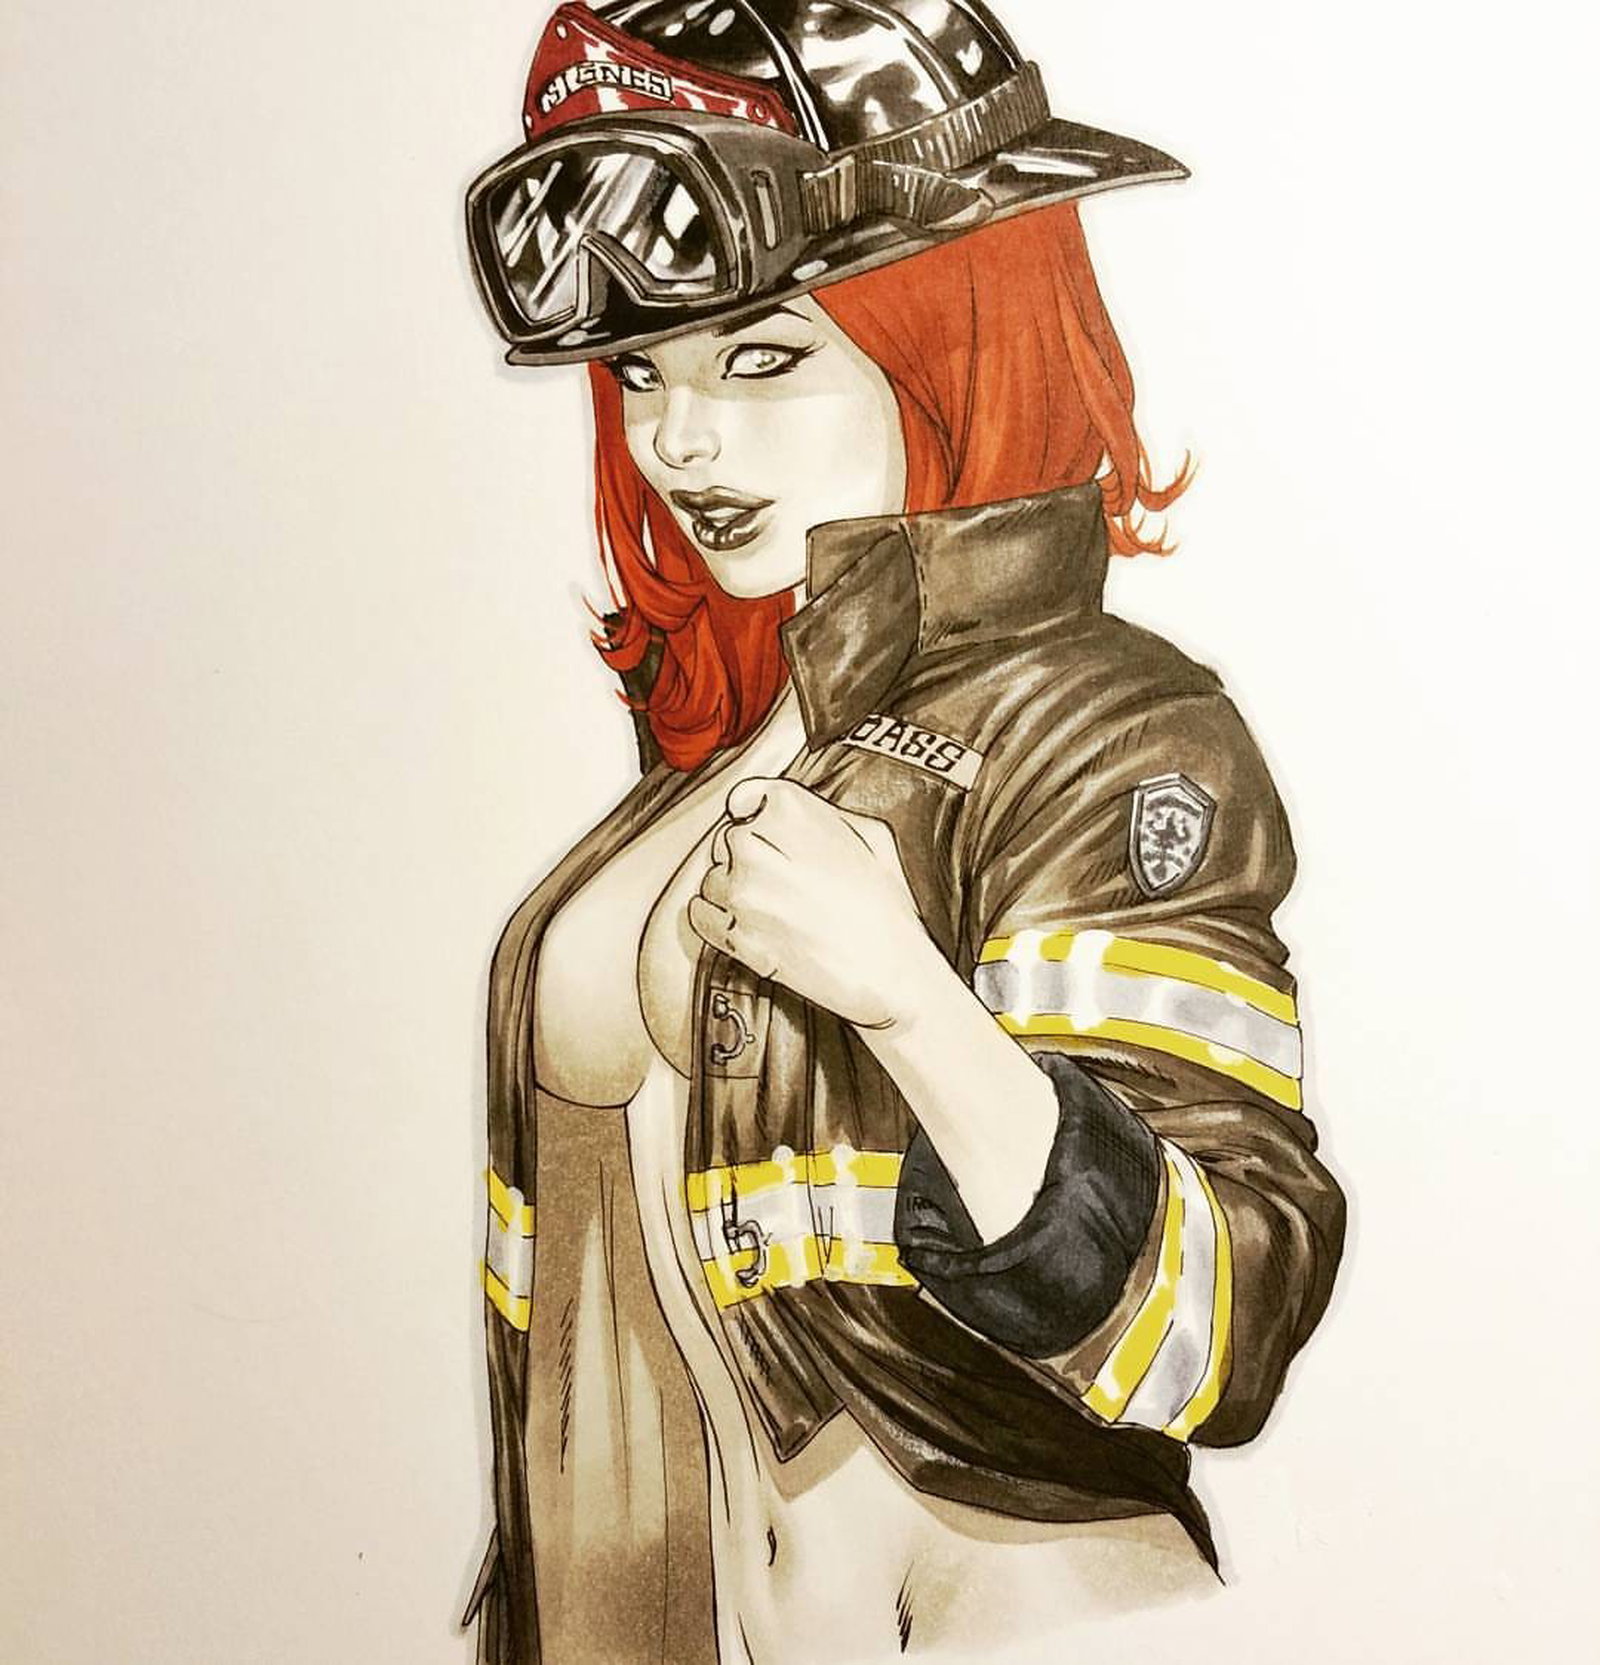 Watch the Photo by Justanotherguy with the username @Justanotherguy79, posted on September 25, 2017 and the text says 'i-am-ebas:

Was proud to draw this one,  firefighters are real life hero’s that run towards danger to save lives. 

#copicmarkers #copic #ericbasalduaart #ericbasaldua #sexy #firefighter'